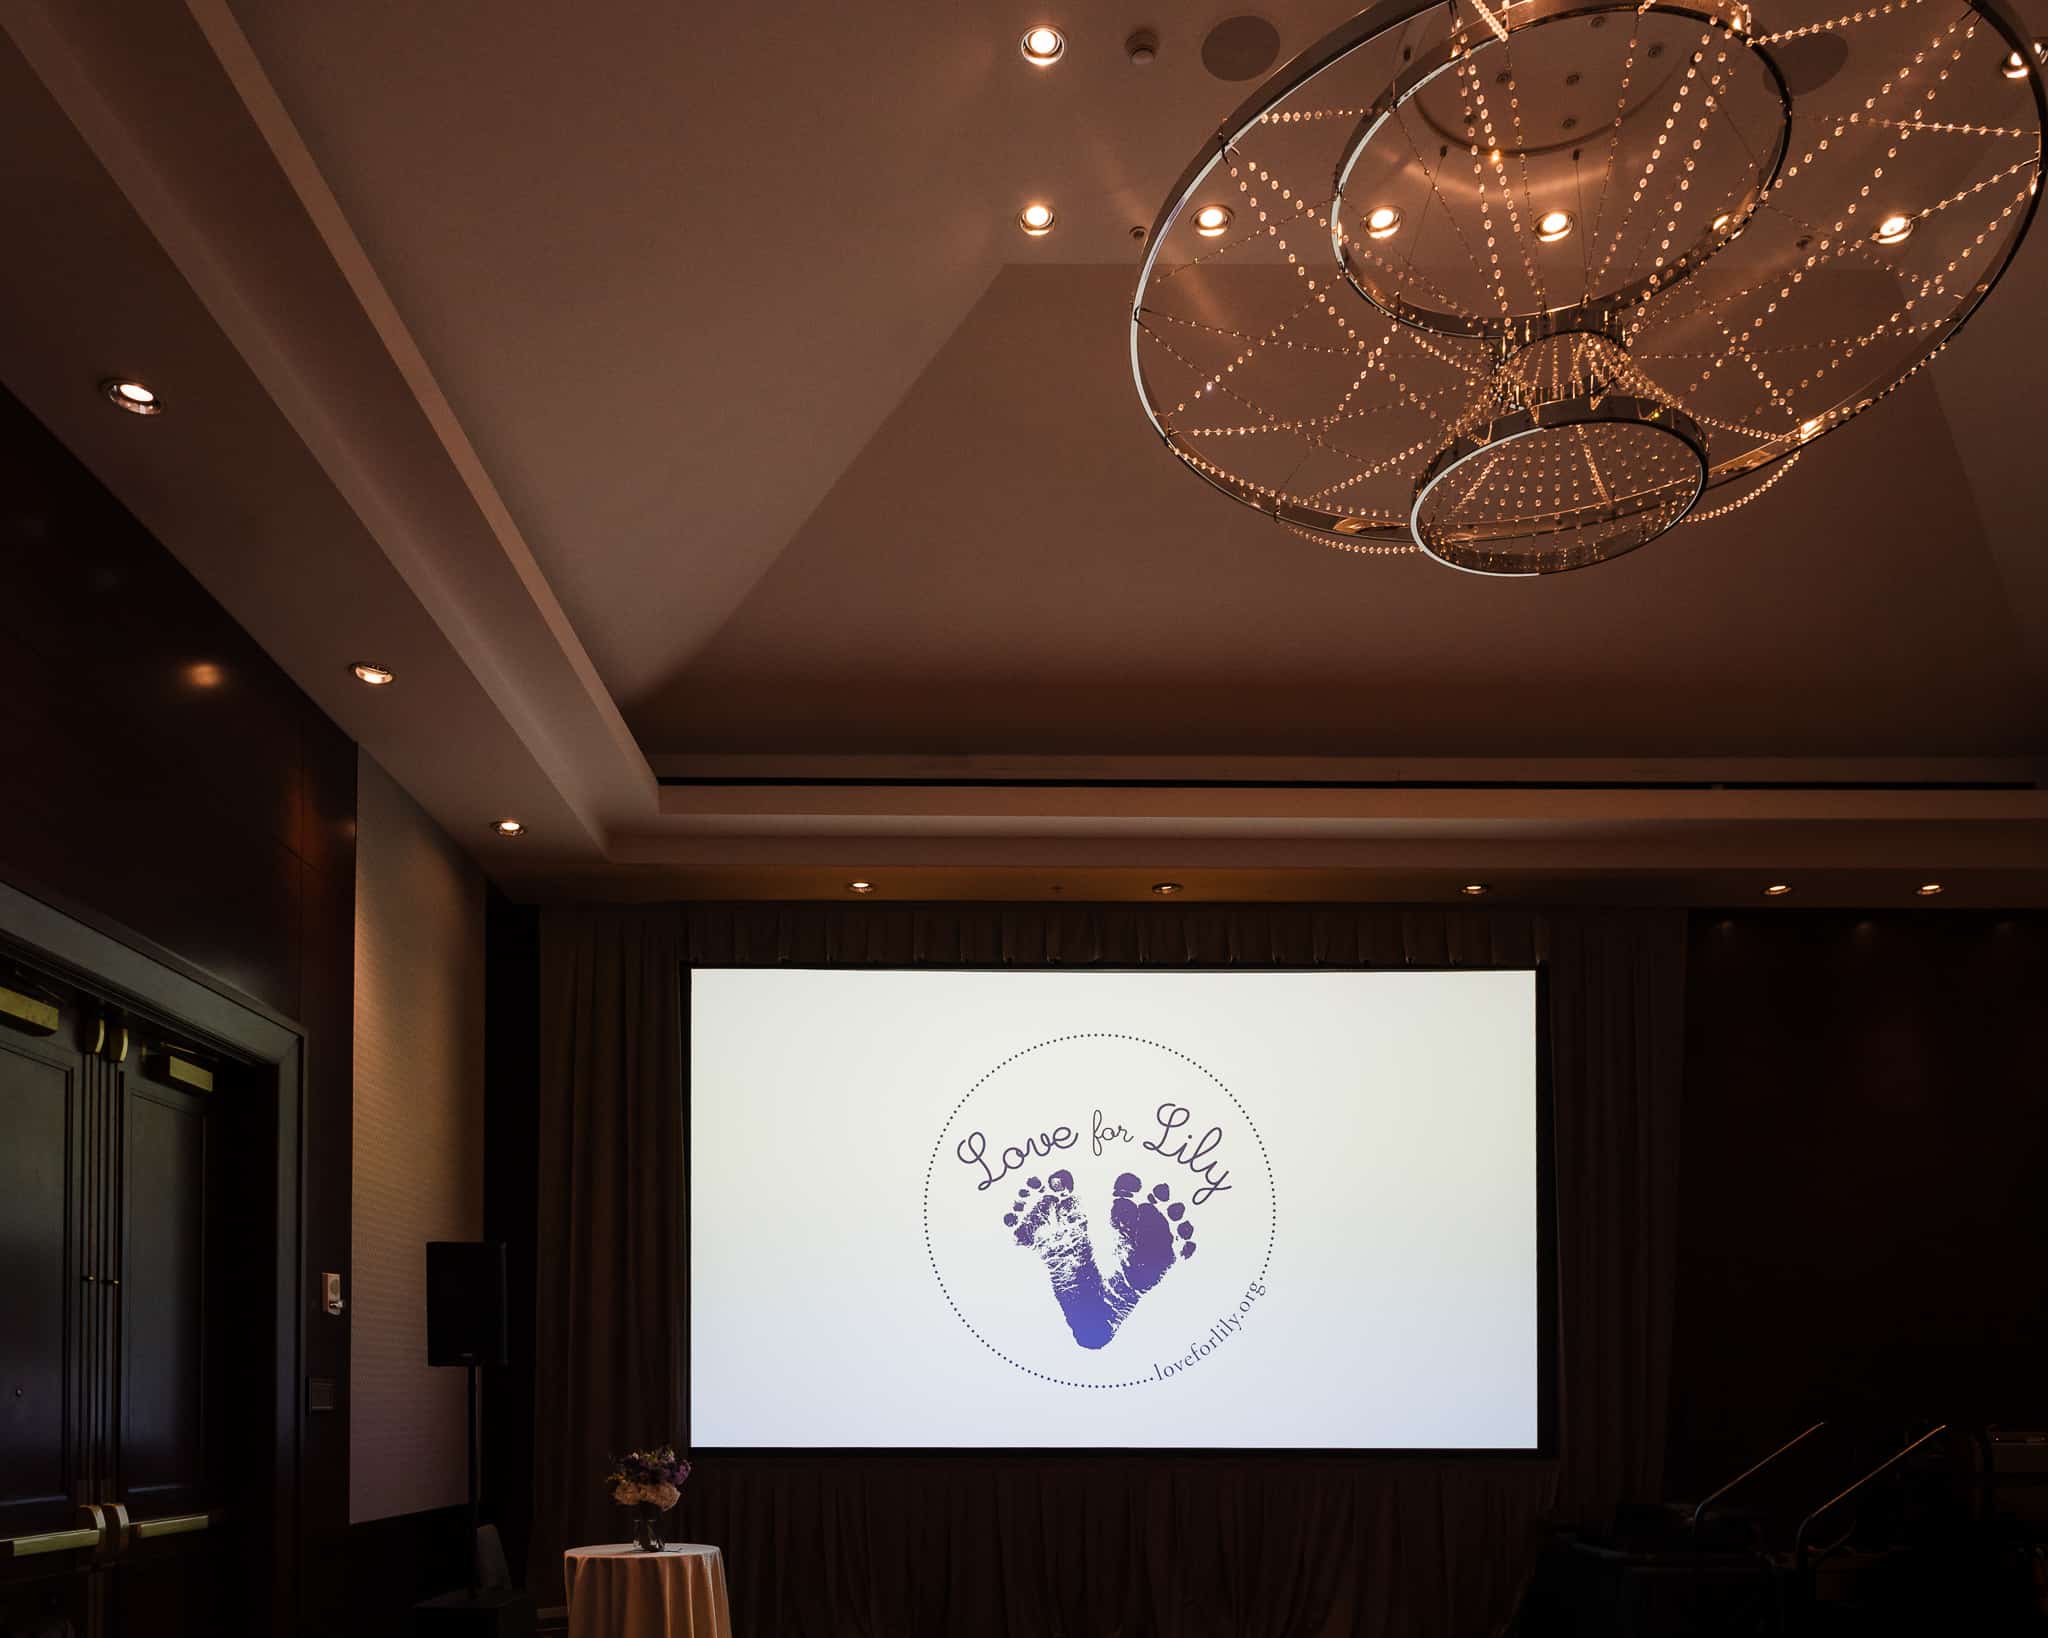 The entrance to the ballroom displays a Love for Lily Logo on the projection screen.